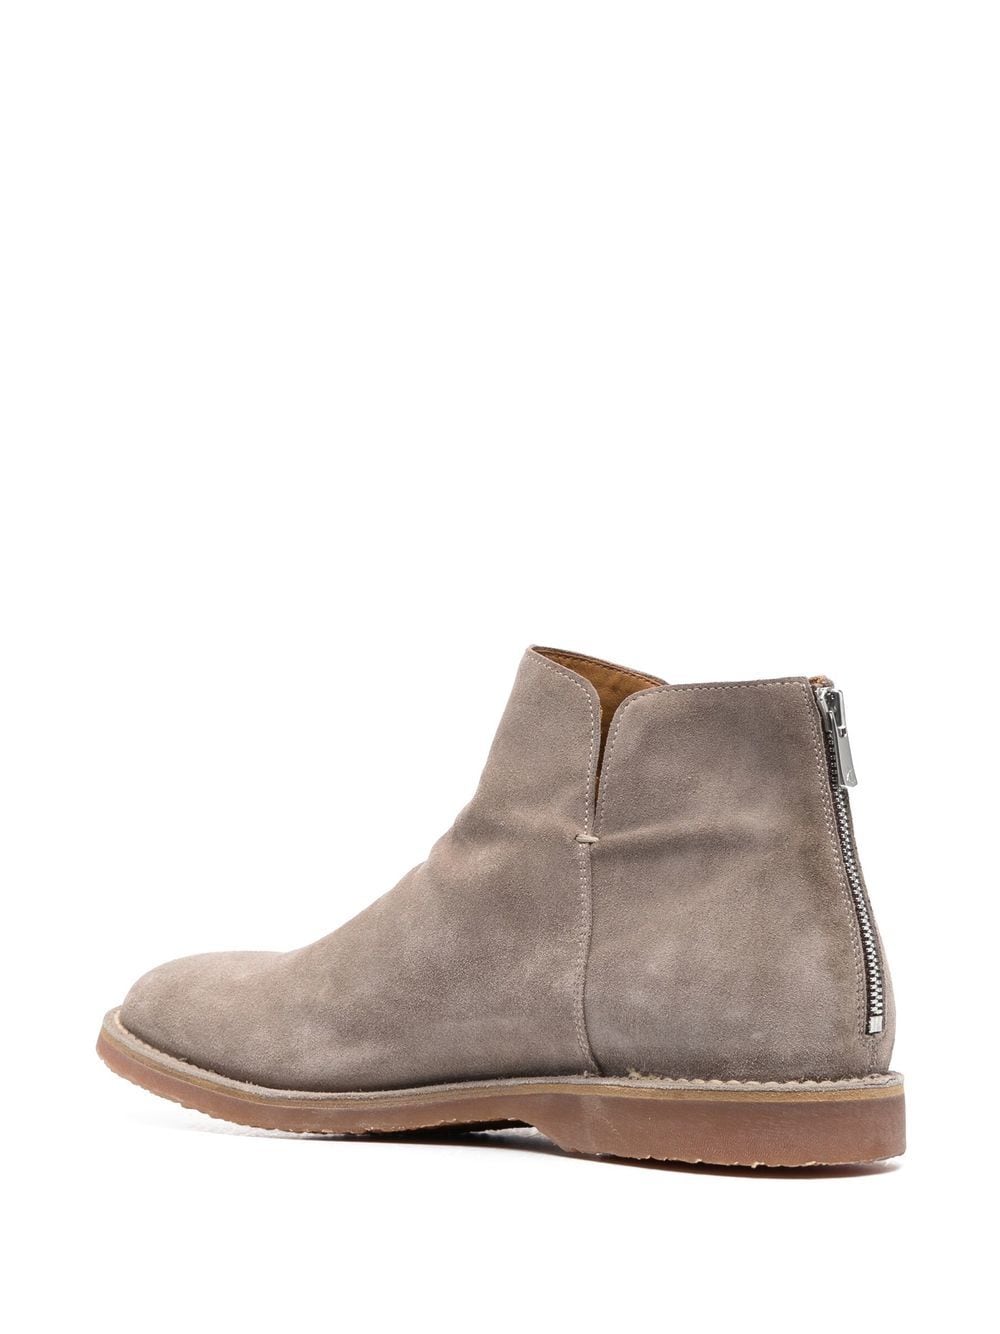 Officine Creative Kent Suede Ankle Boots - Farfetch